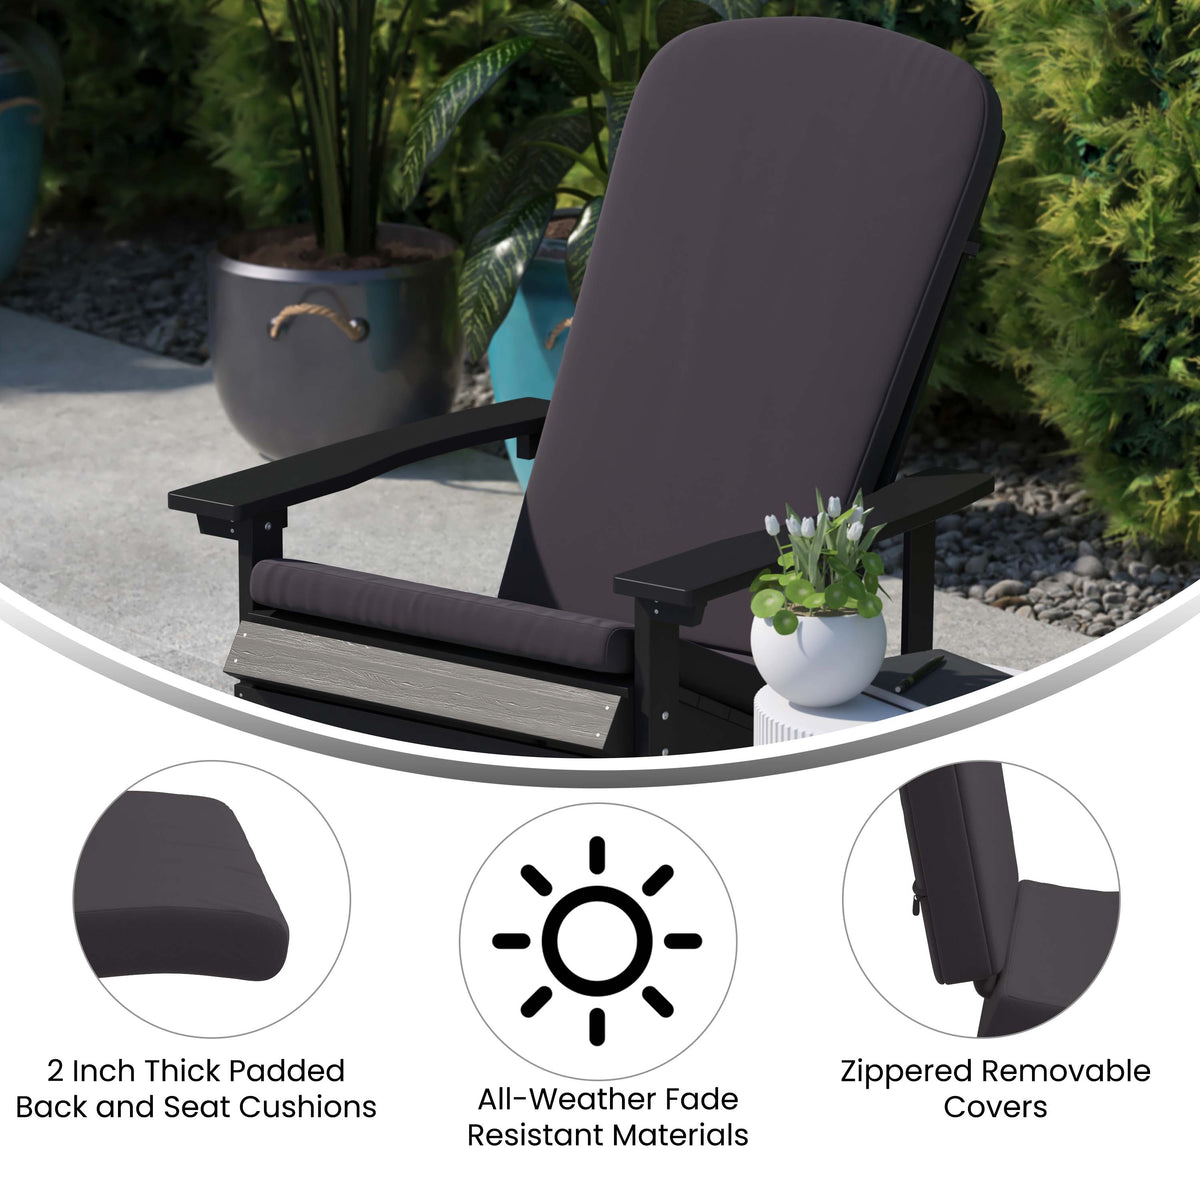 Slate Gray/Gray |#| Indoor/Outdoor Slate Gray Adirondack Chairs with Gray Cushions - Set of 2